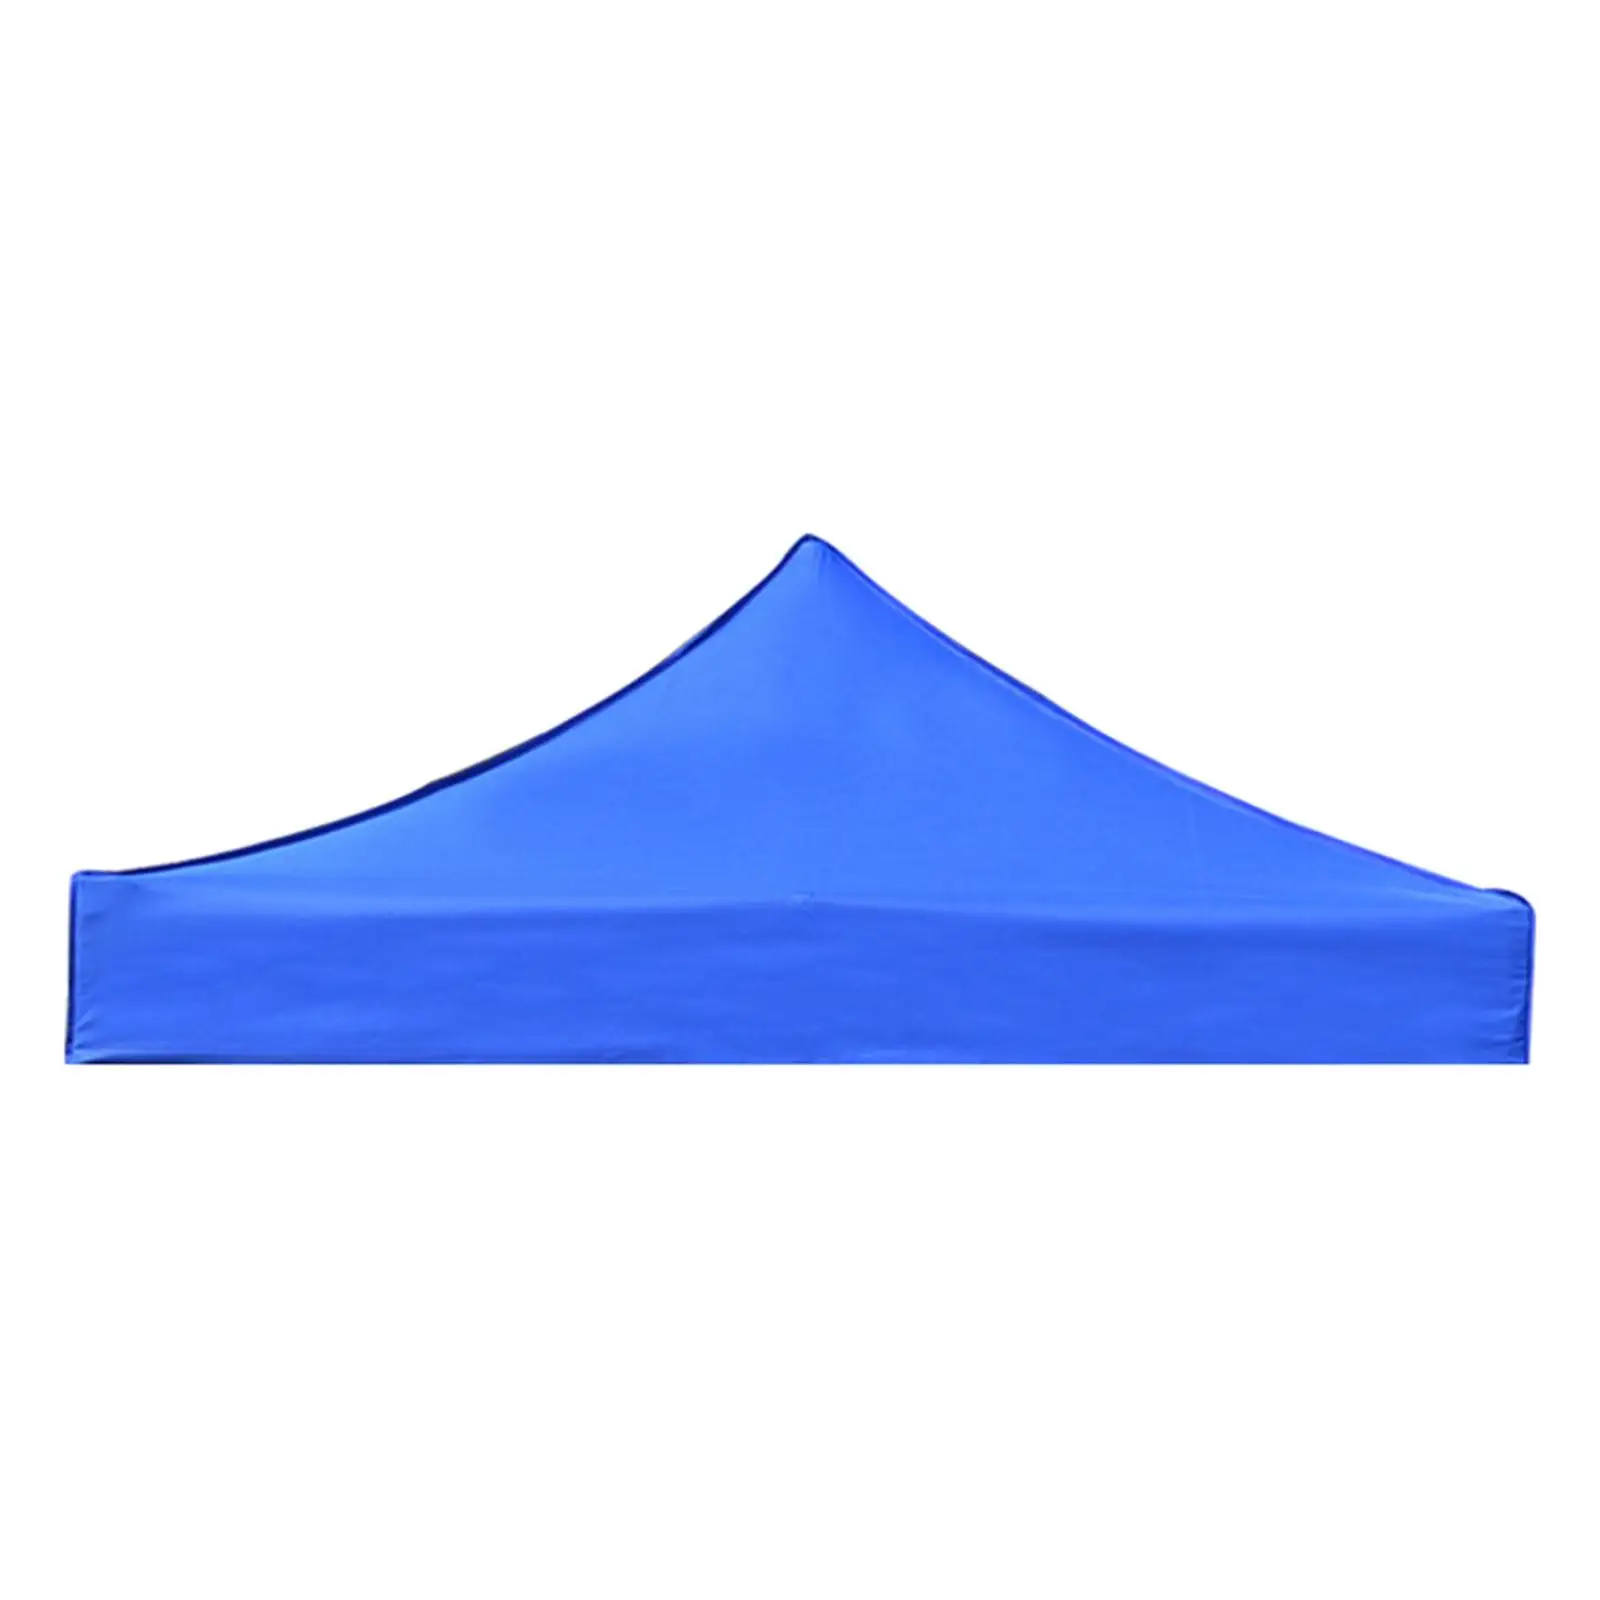 2.9MX2.9M Canopy Replacement Roof Cover Tent Top Cloth Rainproof for Beach